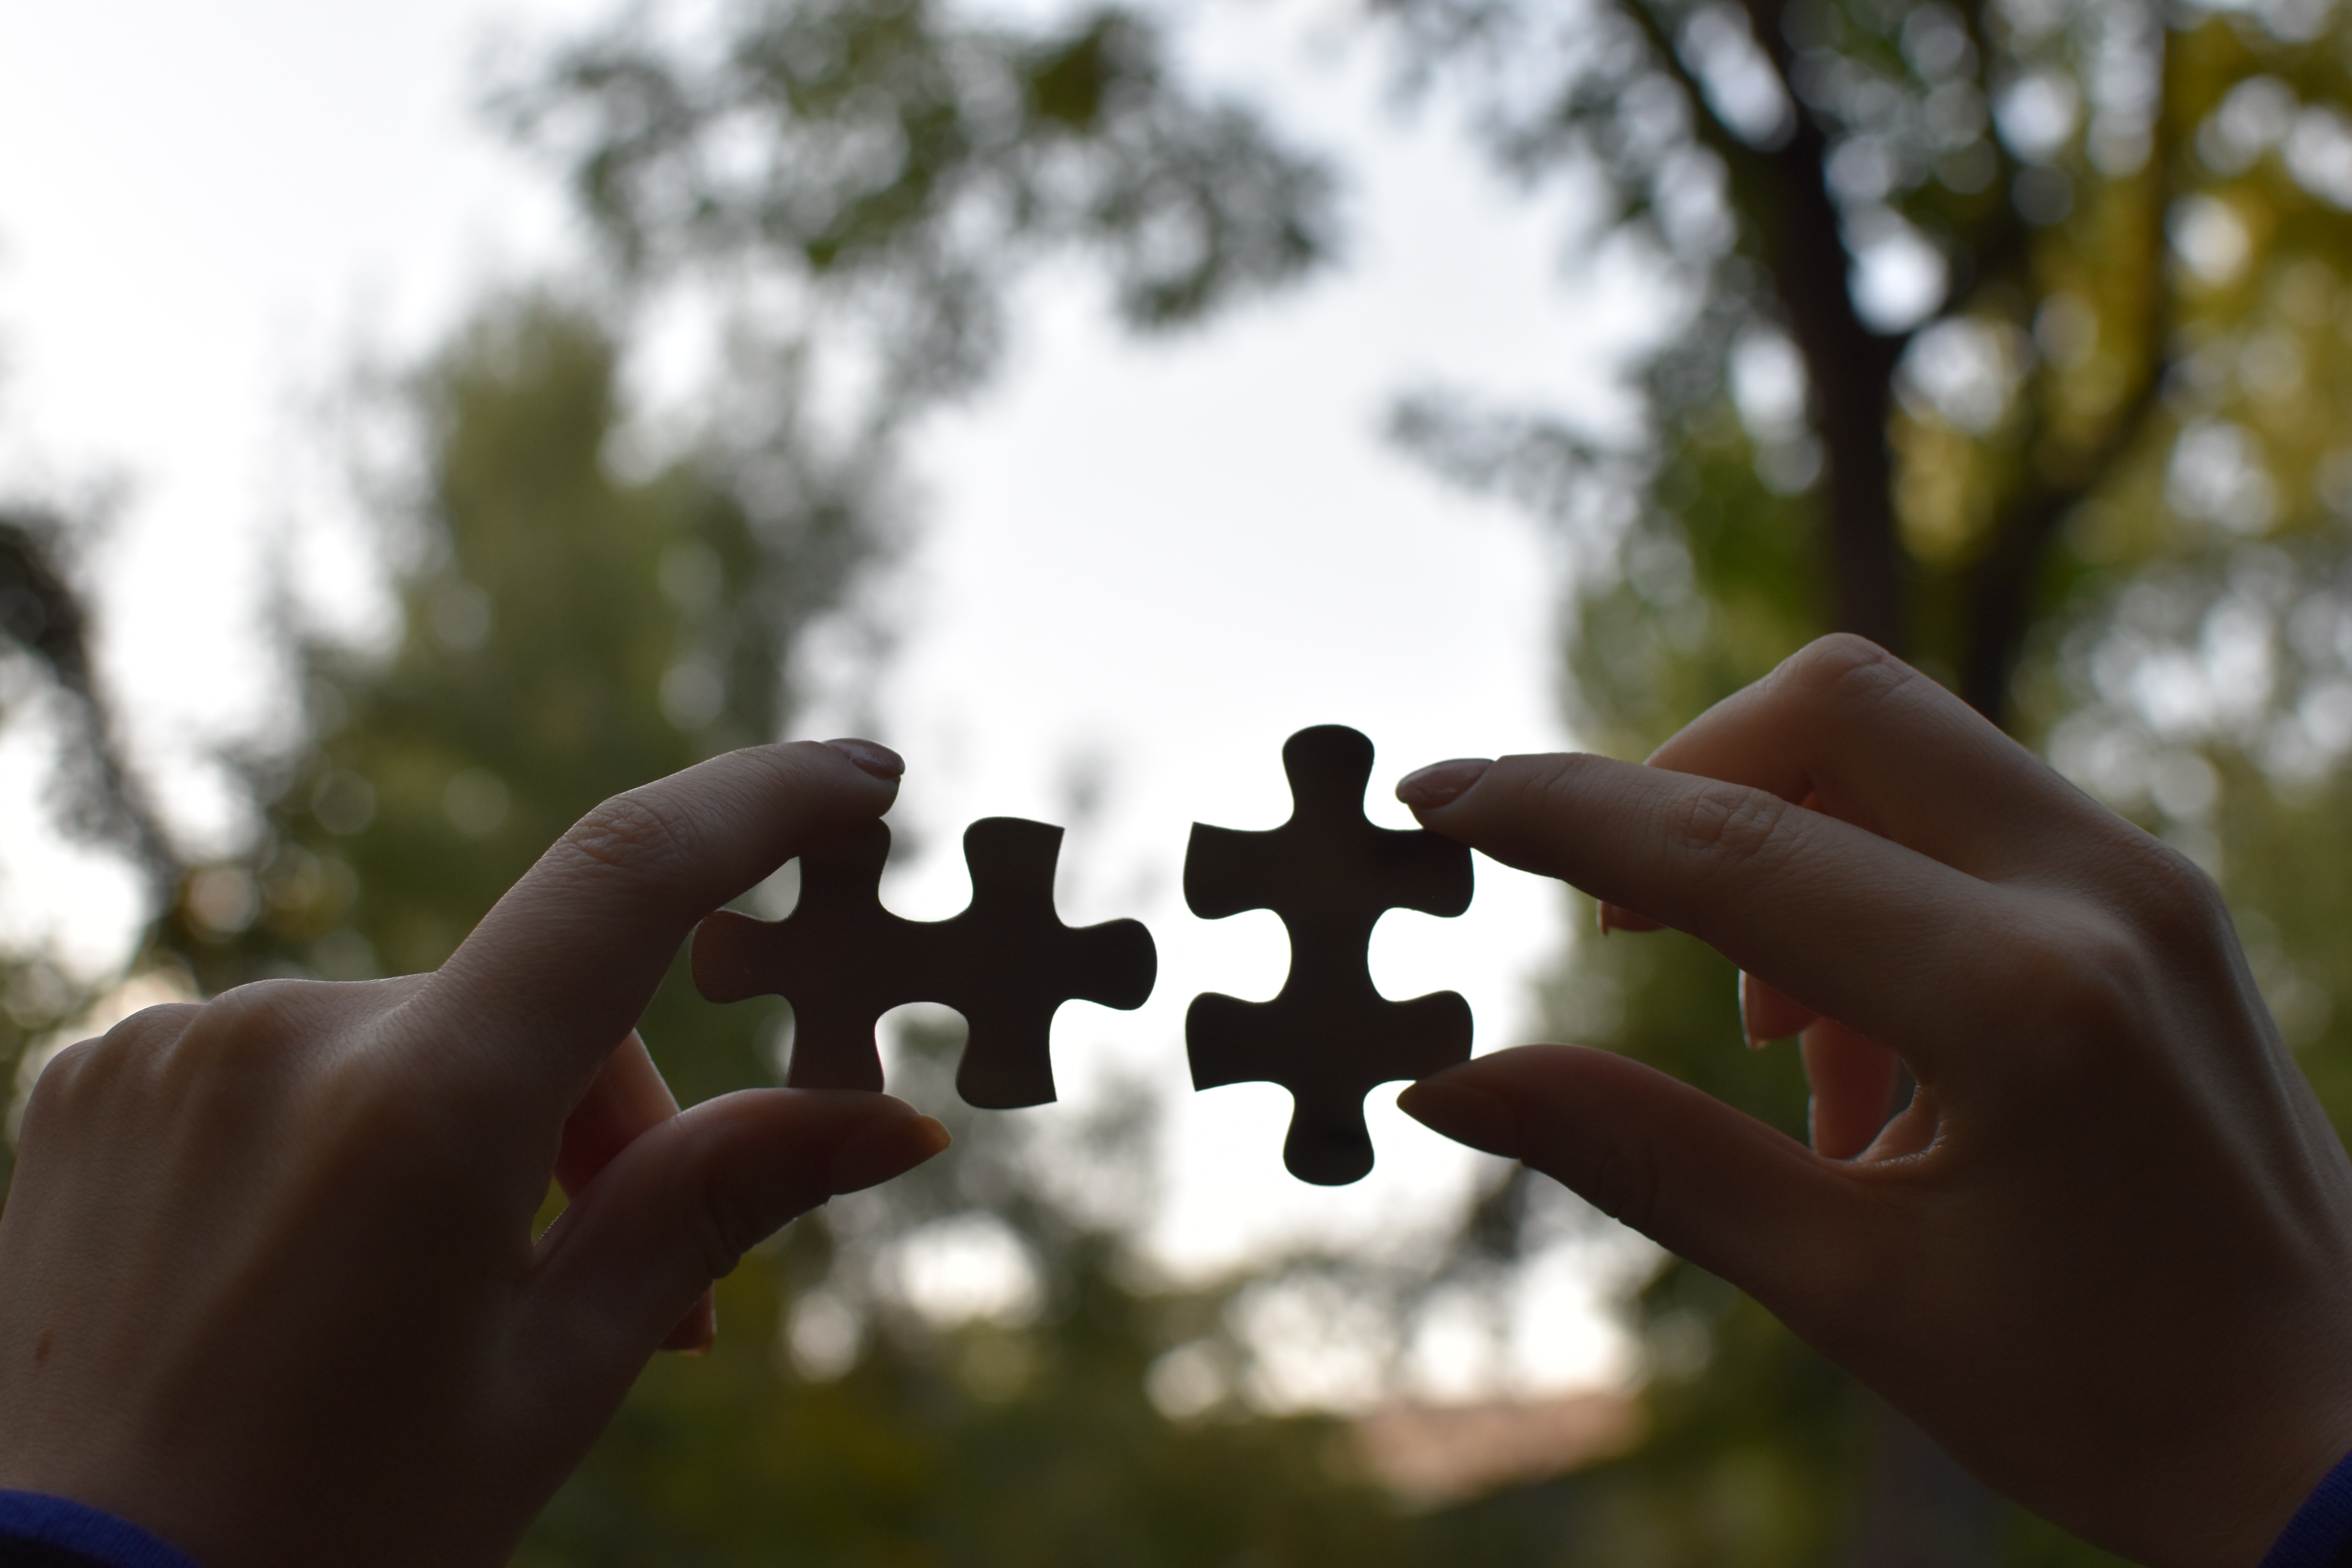 Two people placing jigsaw pieces together